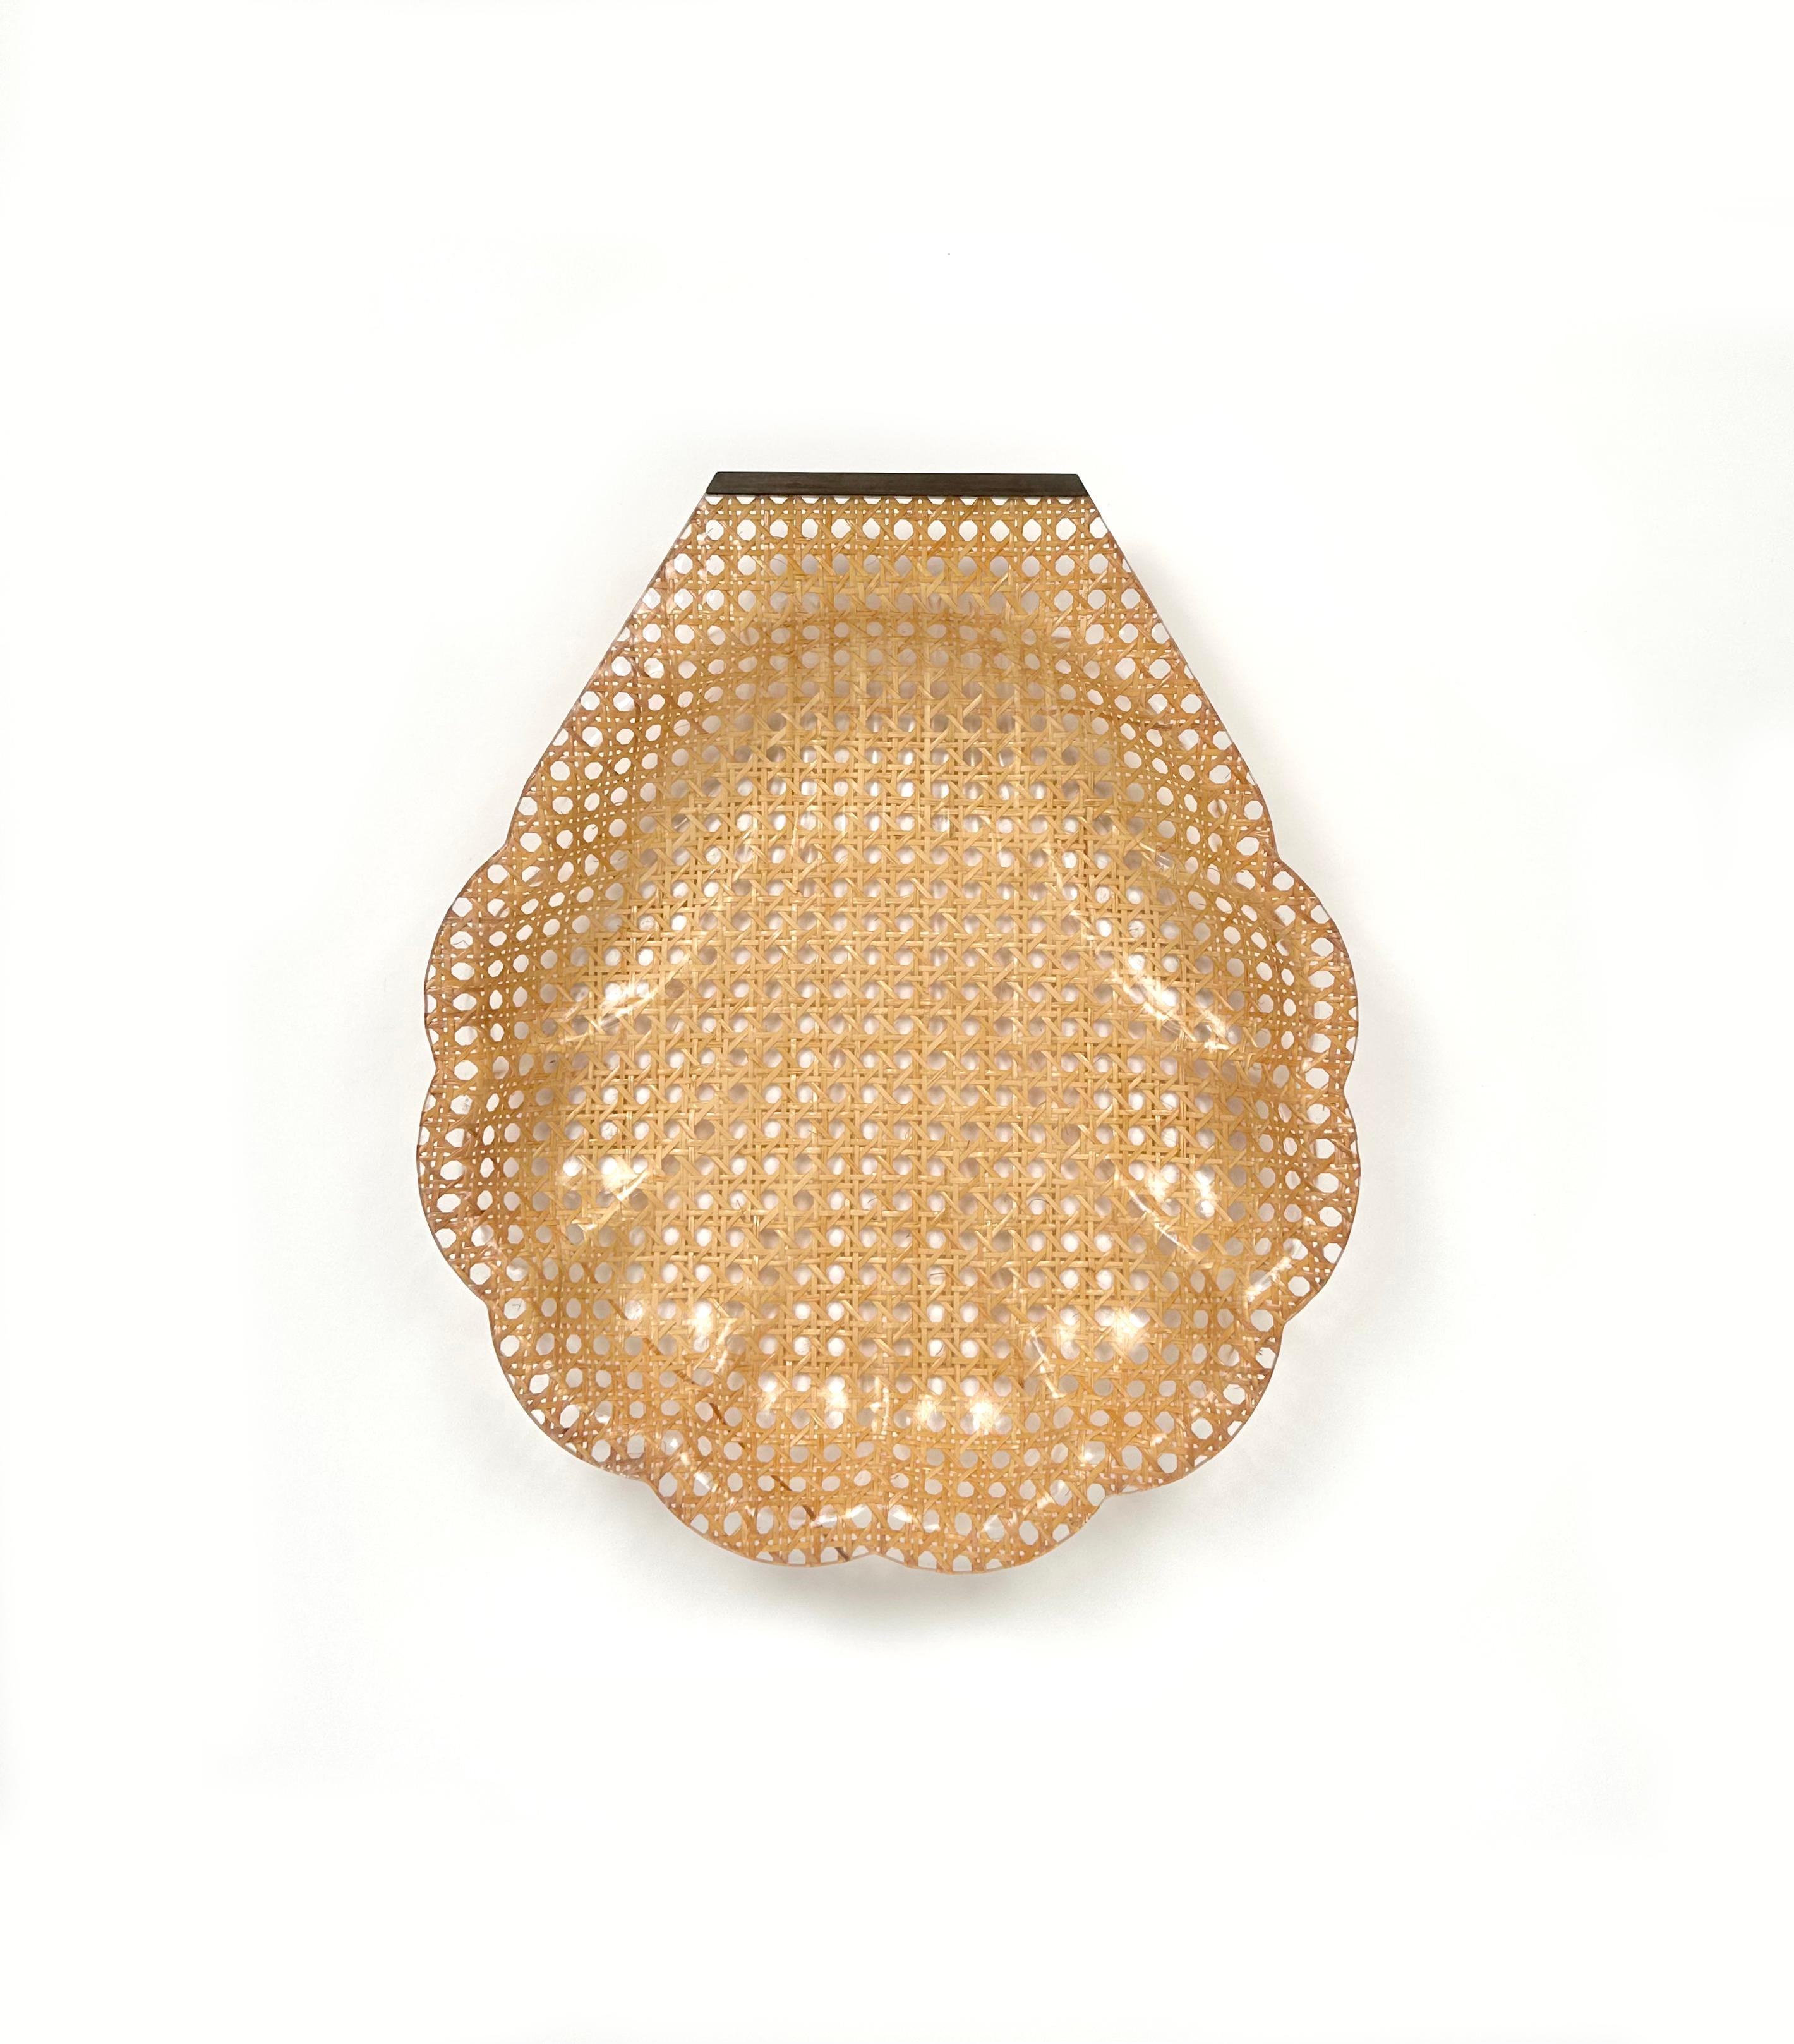 Shell shaped centerpiece / serving tray in lucite, rattan and brass detail in the style of Christian Dior Home.

Made in France in the 1970s.